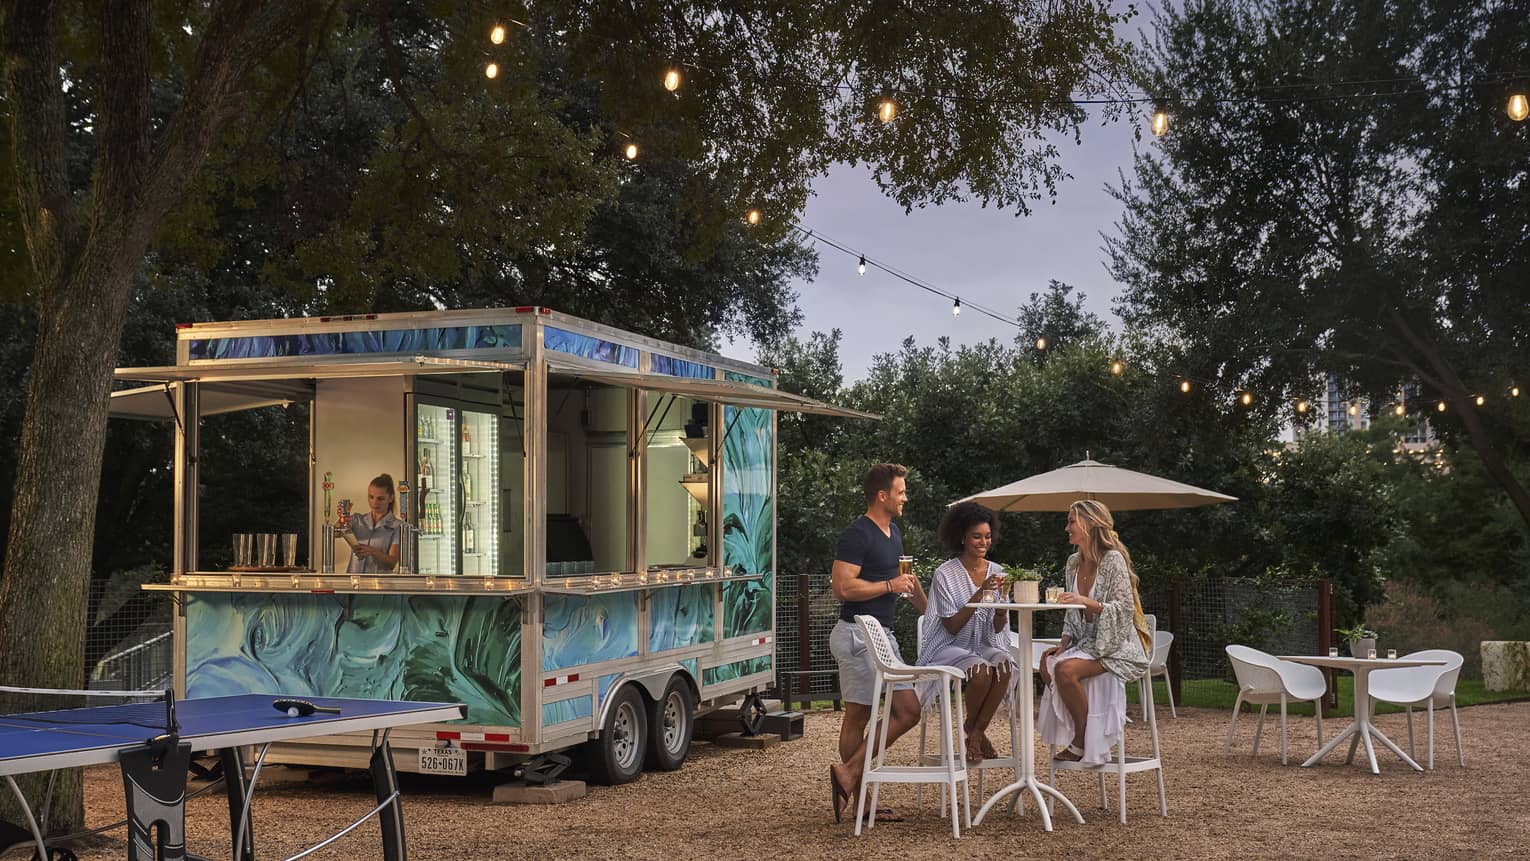 Three people sitting outside of a food truck surrounded by trees.